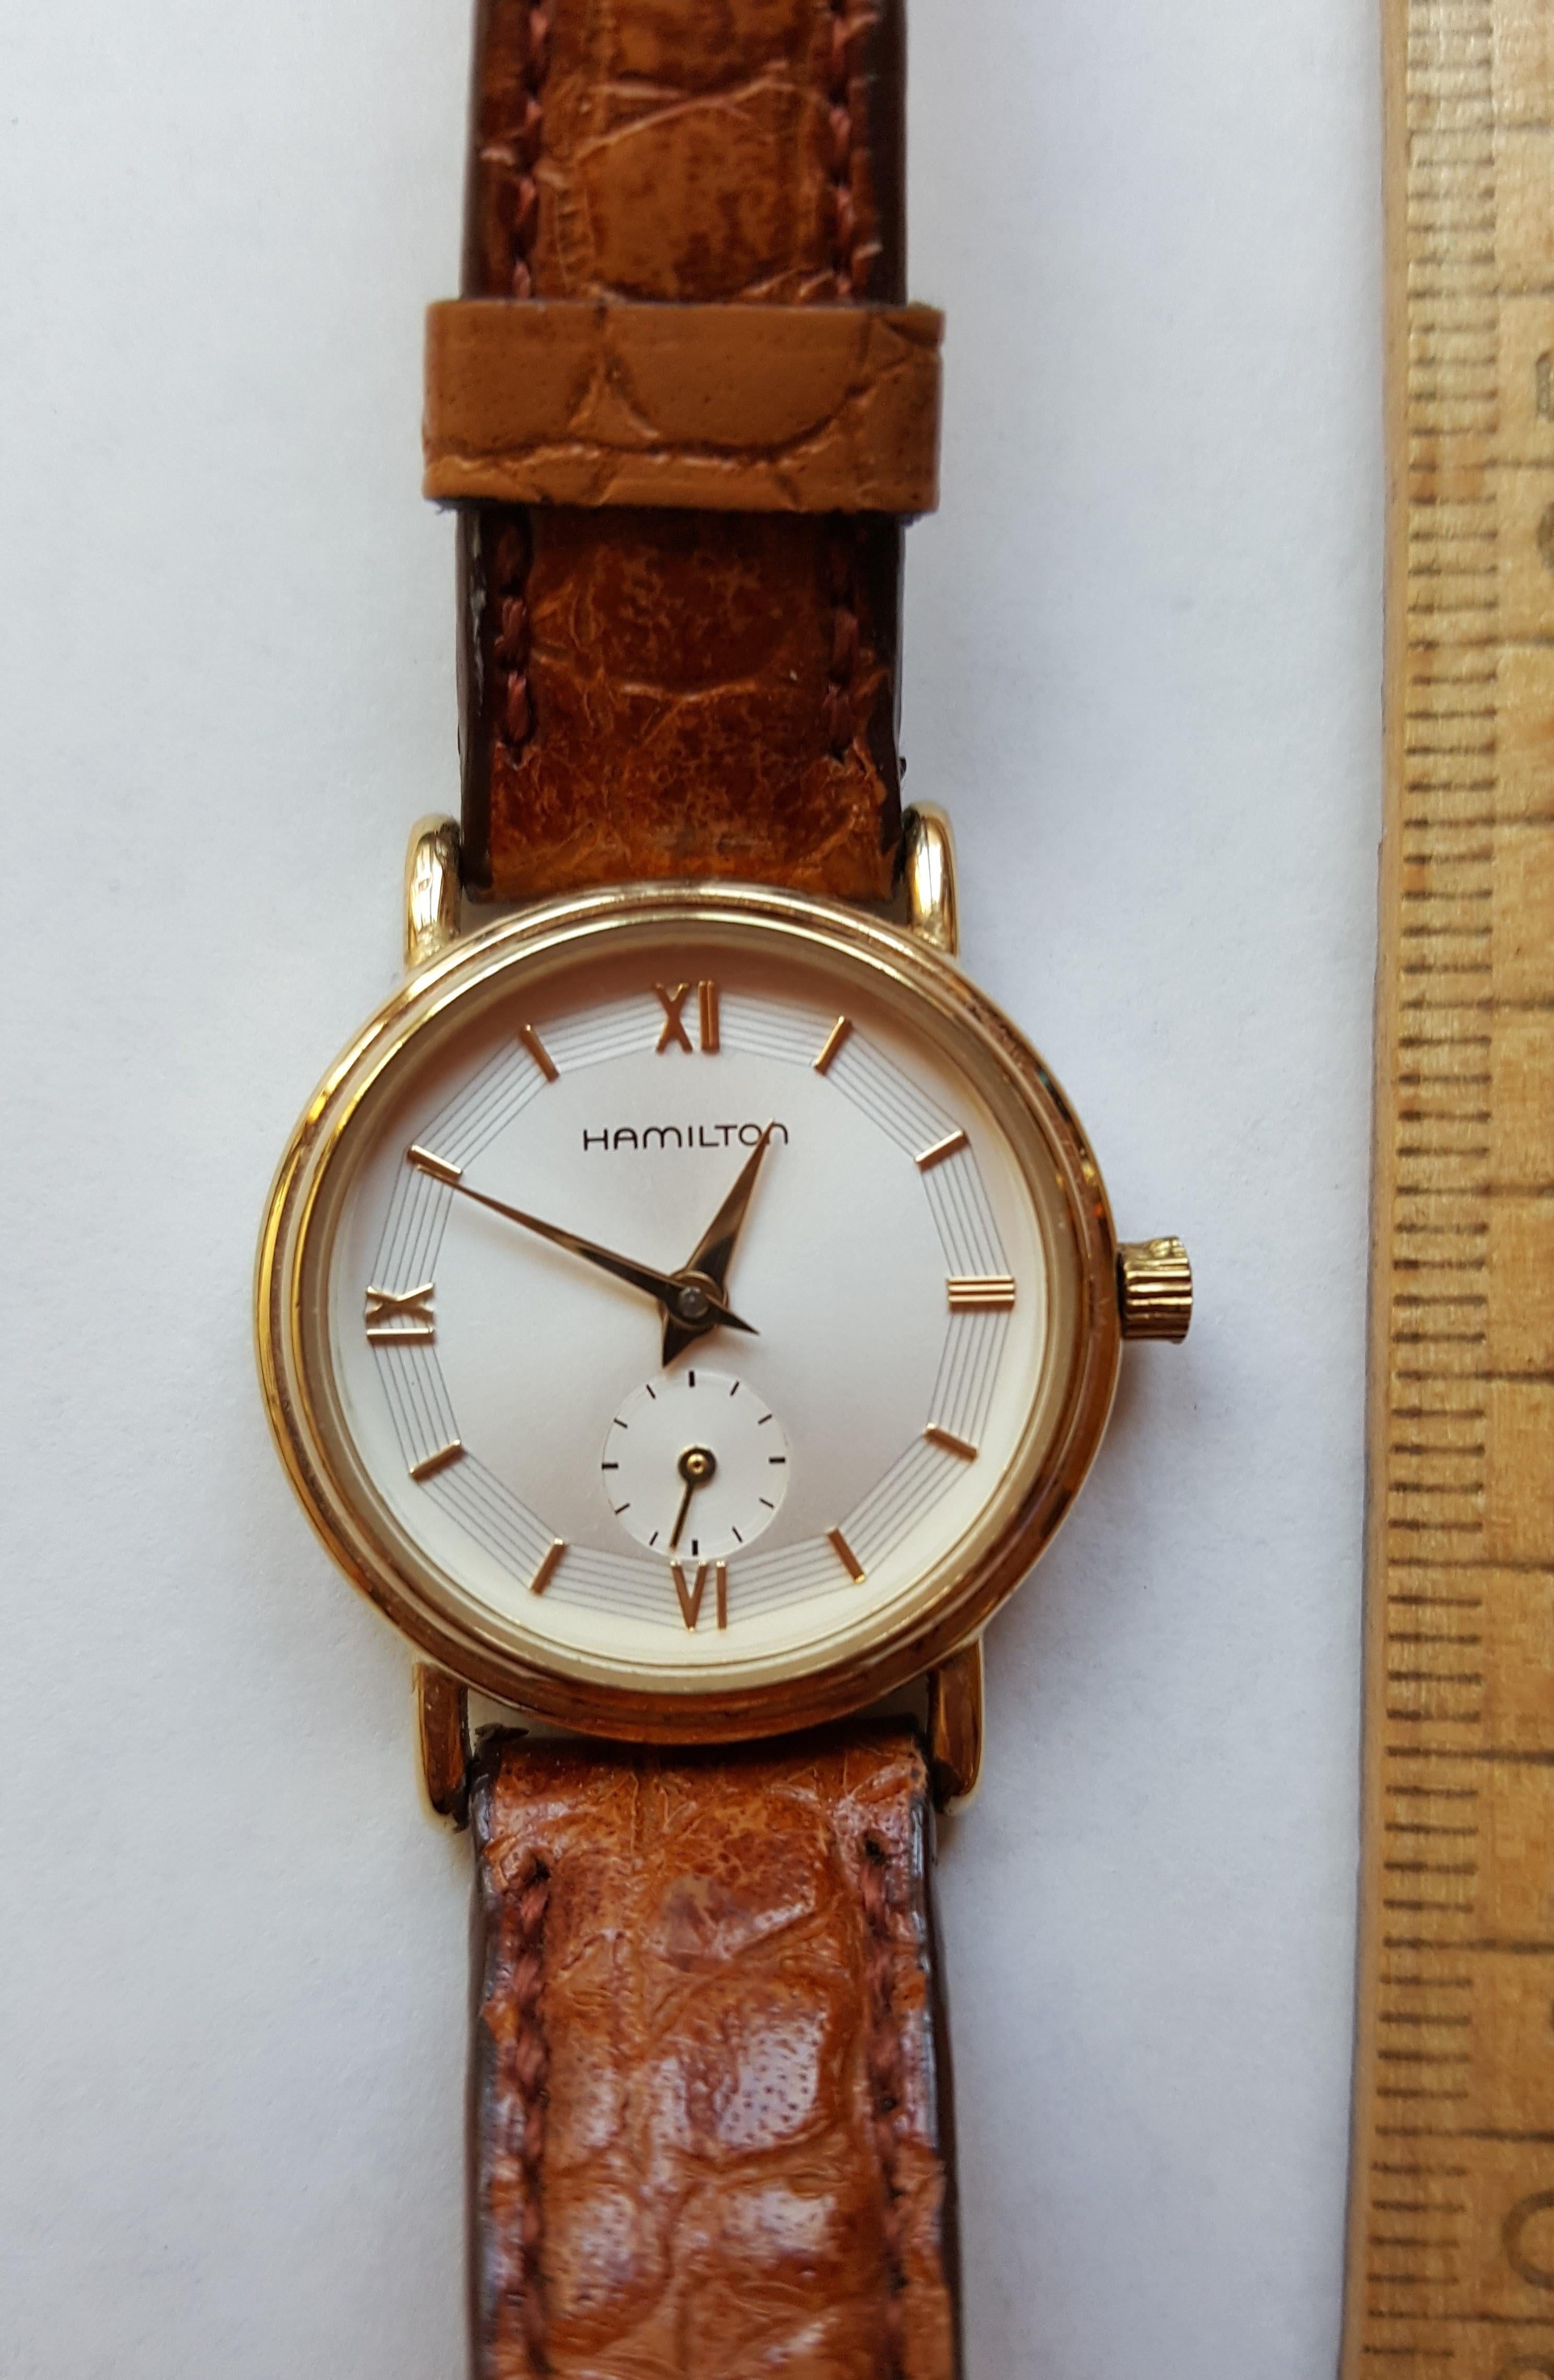 Vintage Hamilton registered edition 6208 ladies watch in clean condition. It's manufactured in the 1980's with a vintage, casual style, 23 mm round case stainless steel with 18kt yellow gold plating, quartz movement, Swiss made, water resistant,